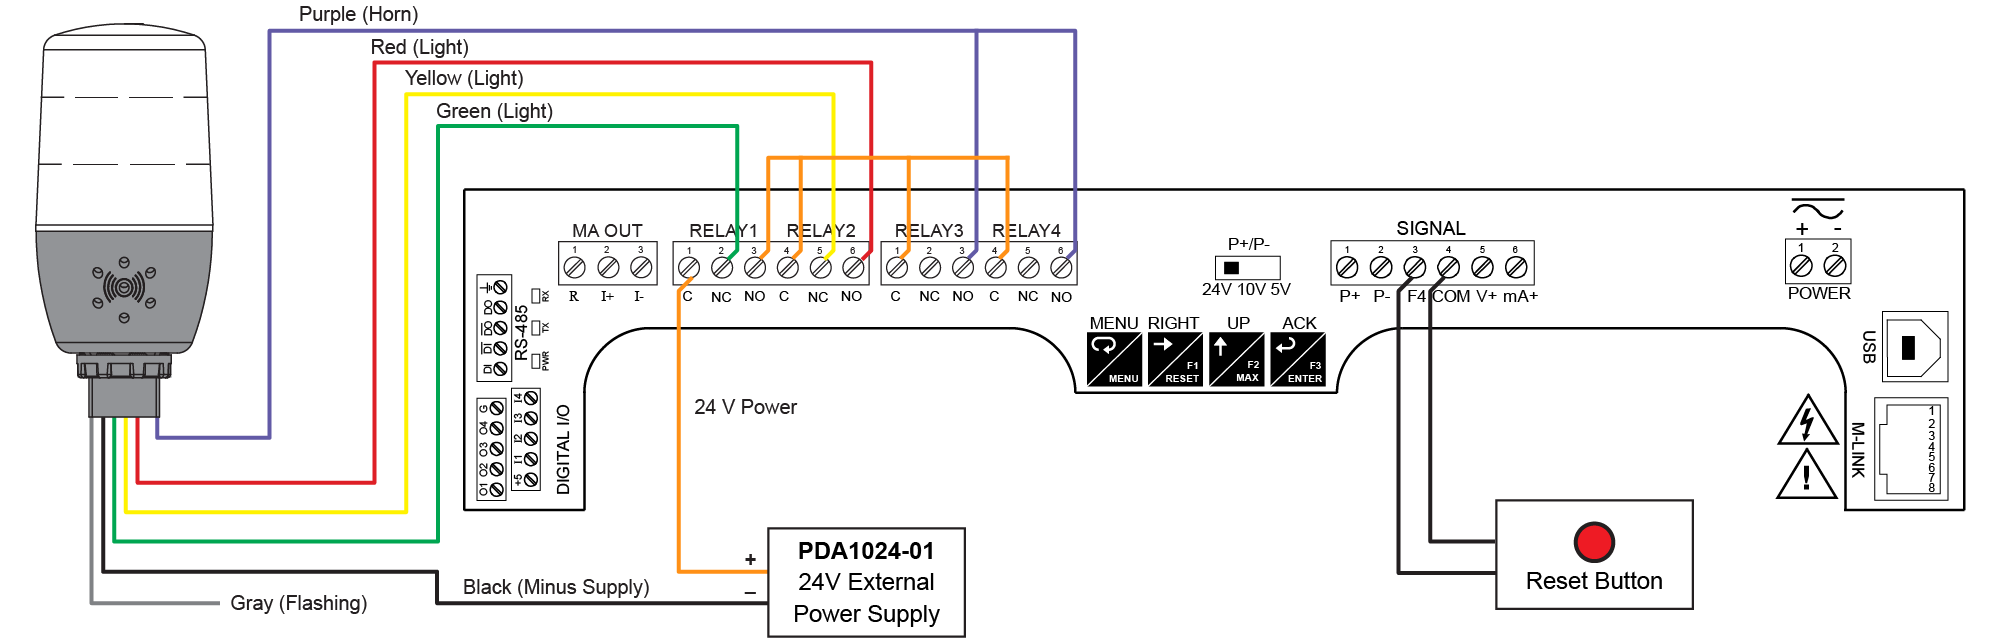 Wiring Connections for PDA-LH3LC-RYG Models Using PDA1024-01 External Power Supply